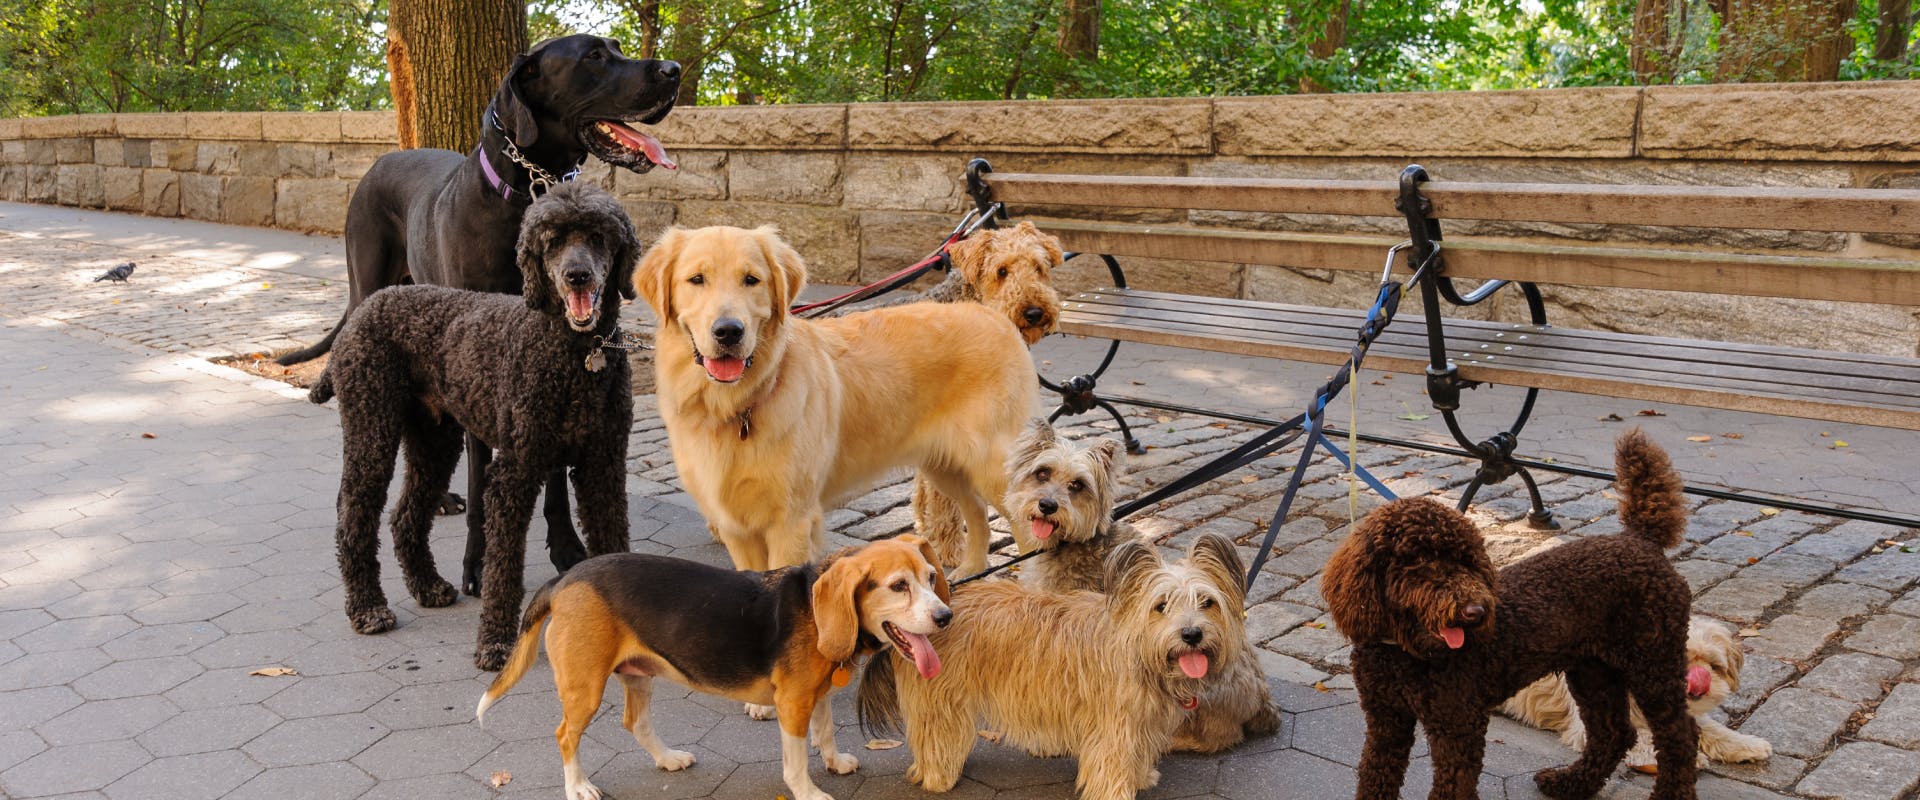 a group of small vs medium vs large dogs on a walk together in a park